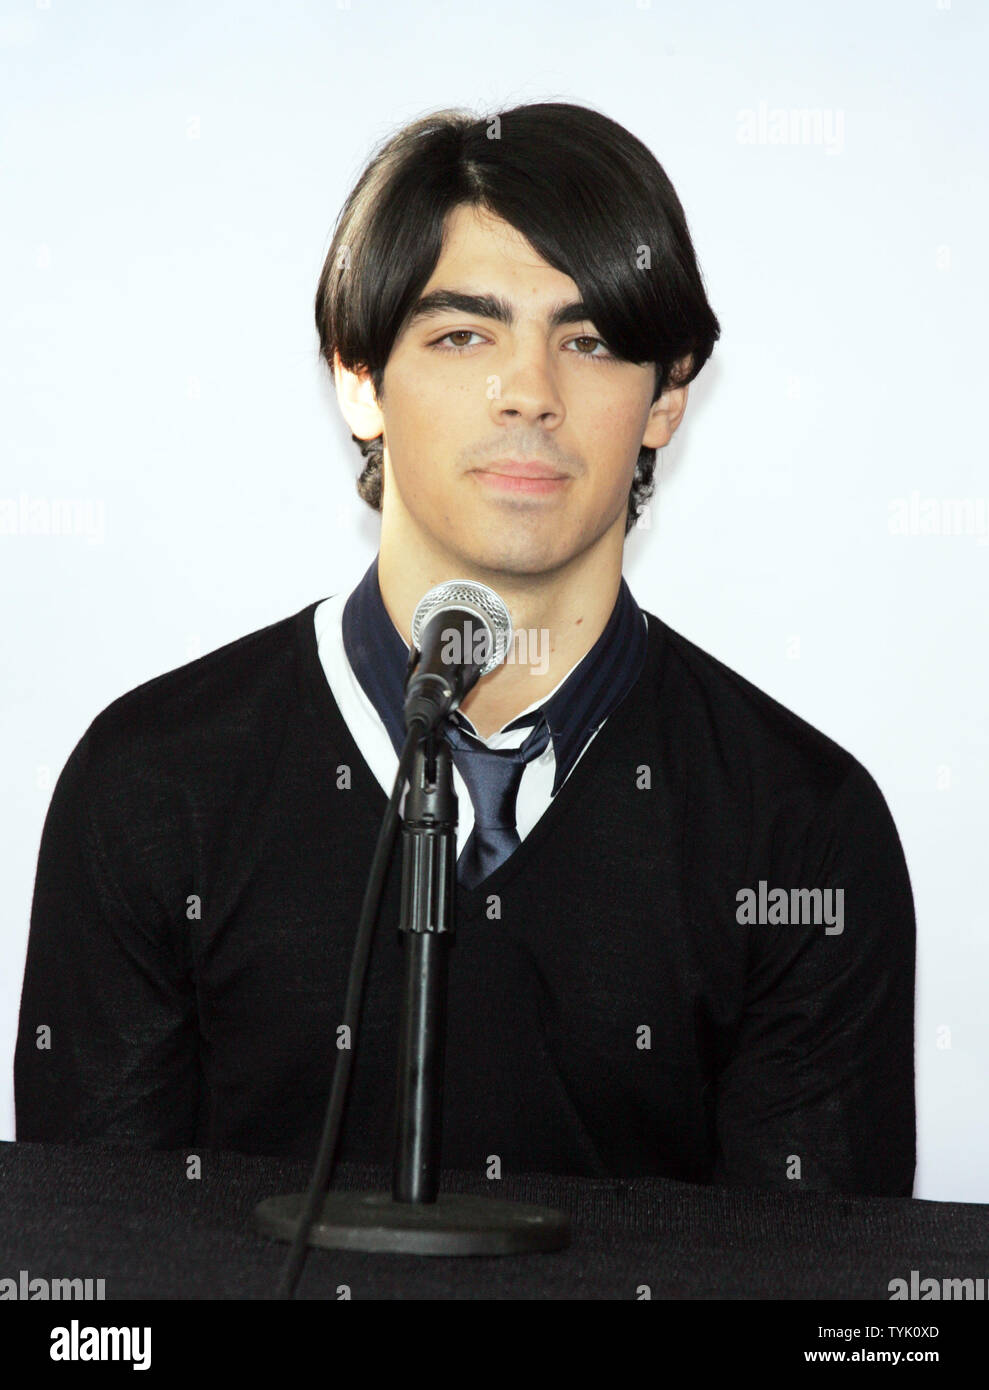 The Jonas Brothers' Joe Jonas attends a press conference about embarking on their 'Surprise Theater Invasion' at the Westchester Airport in New York on February 28, 2009.  (UPI Photo/Laura Cavanaugh) Stock Photo